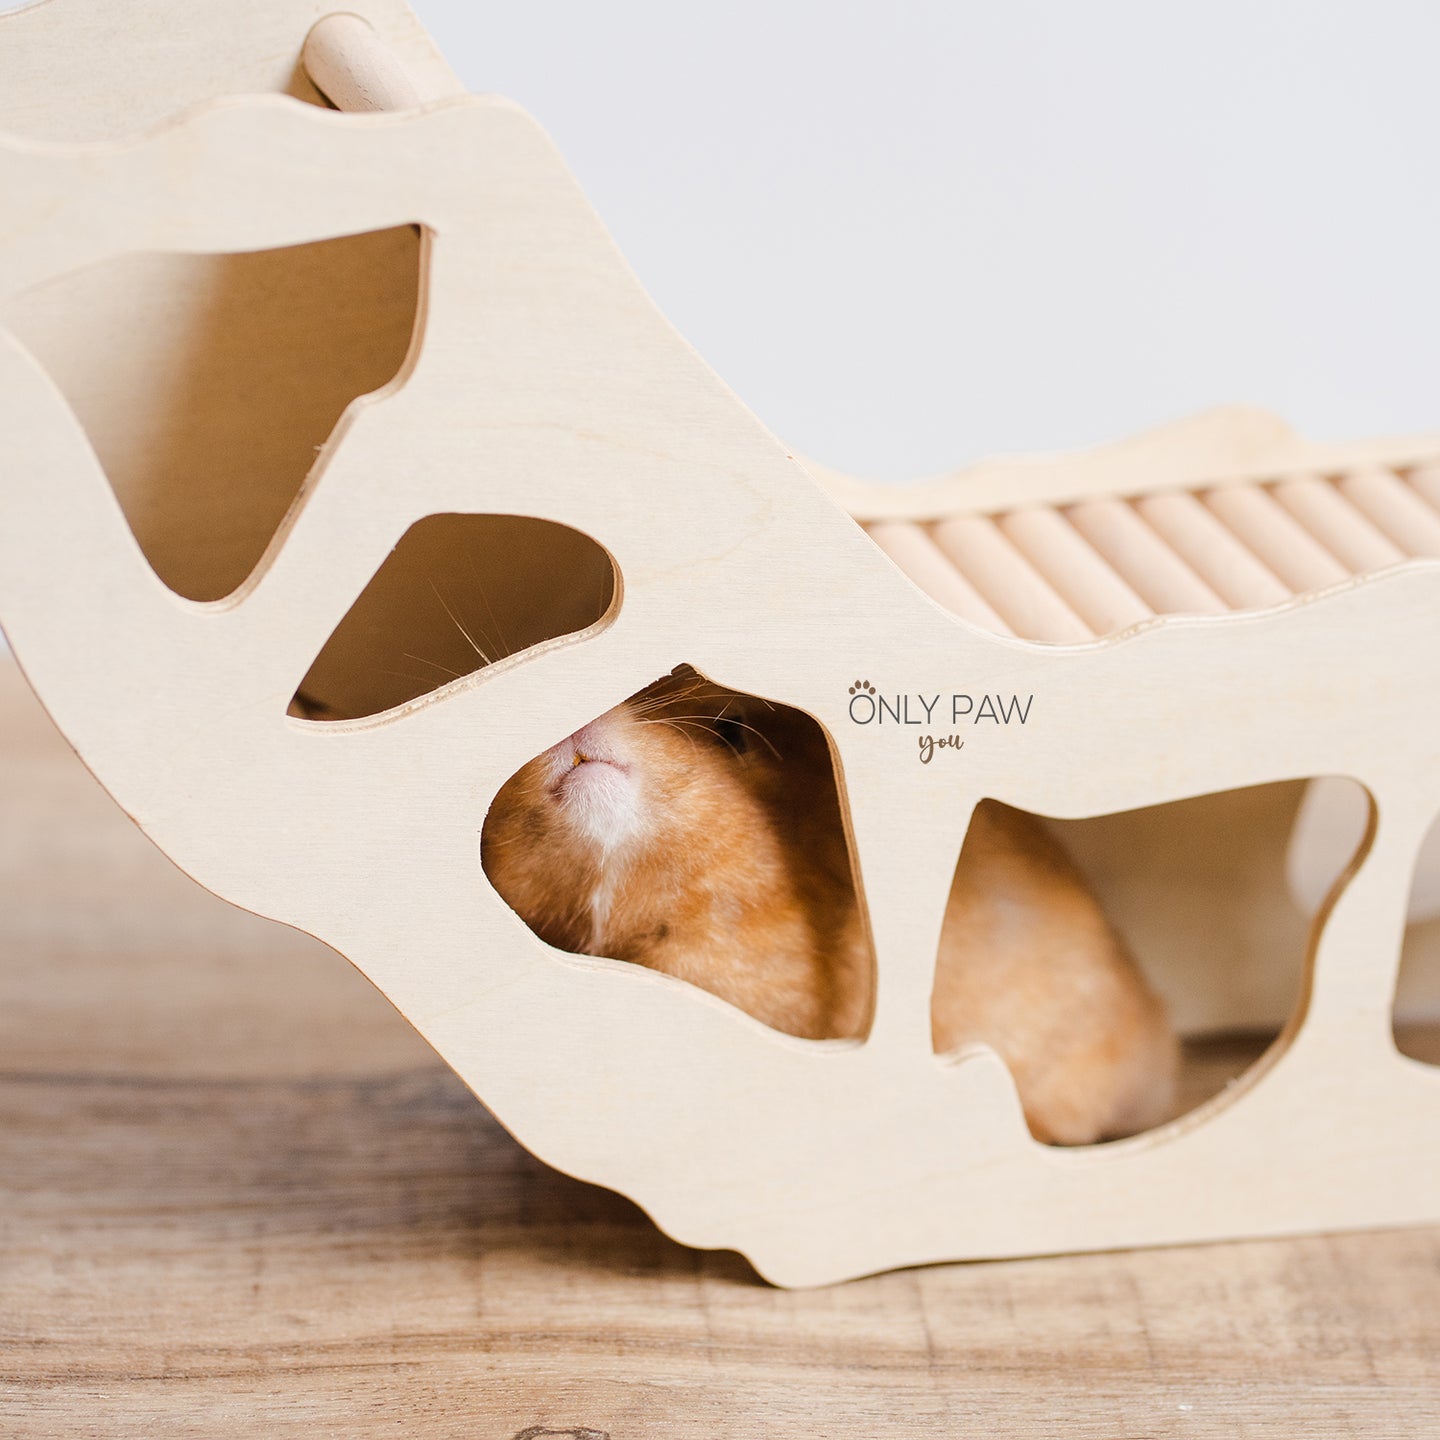 Under & Over Tunnel-Bridge for hamsters